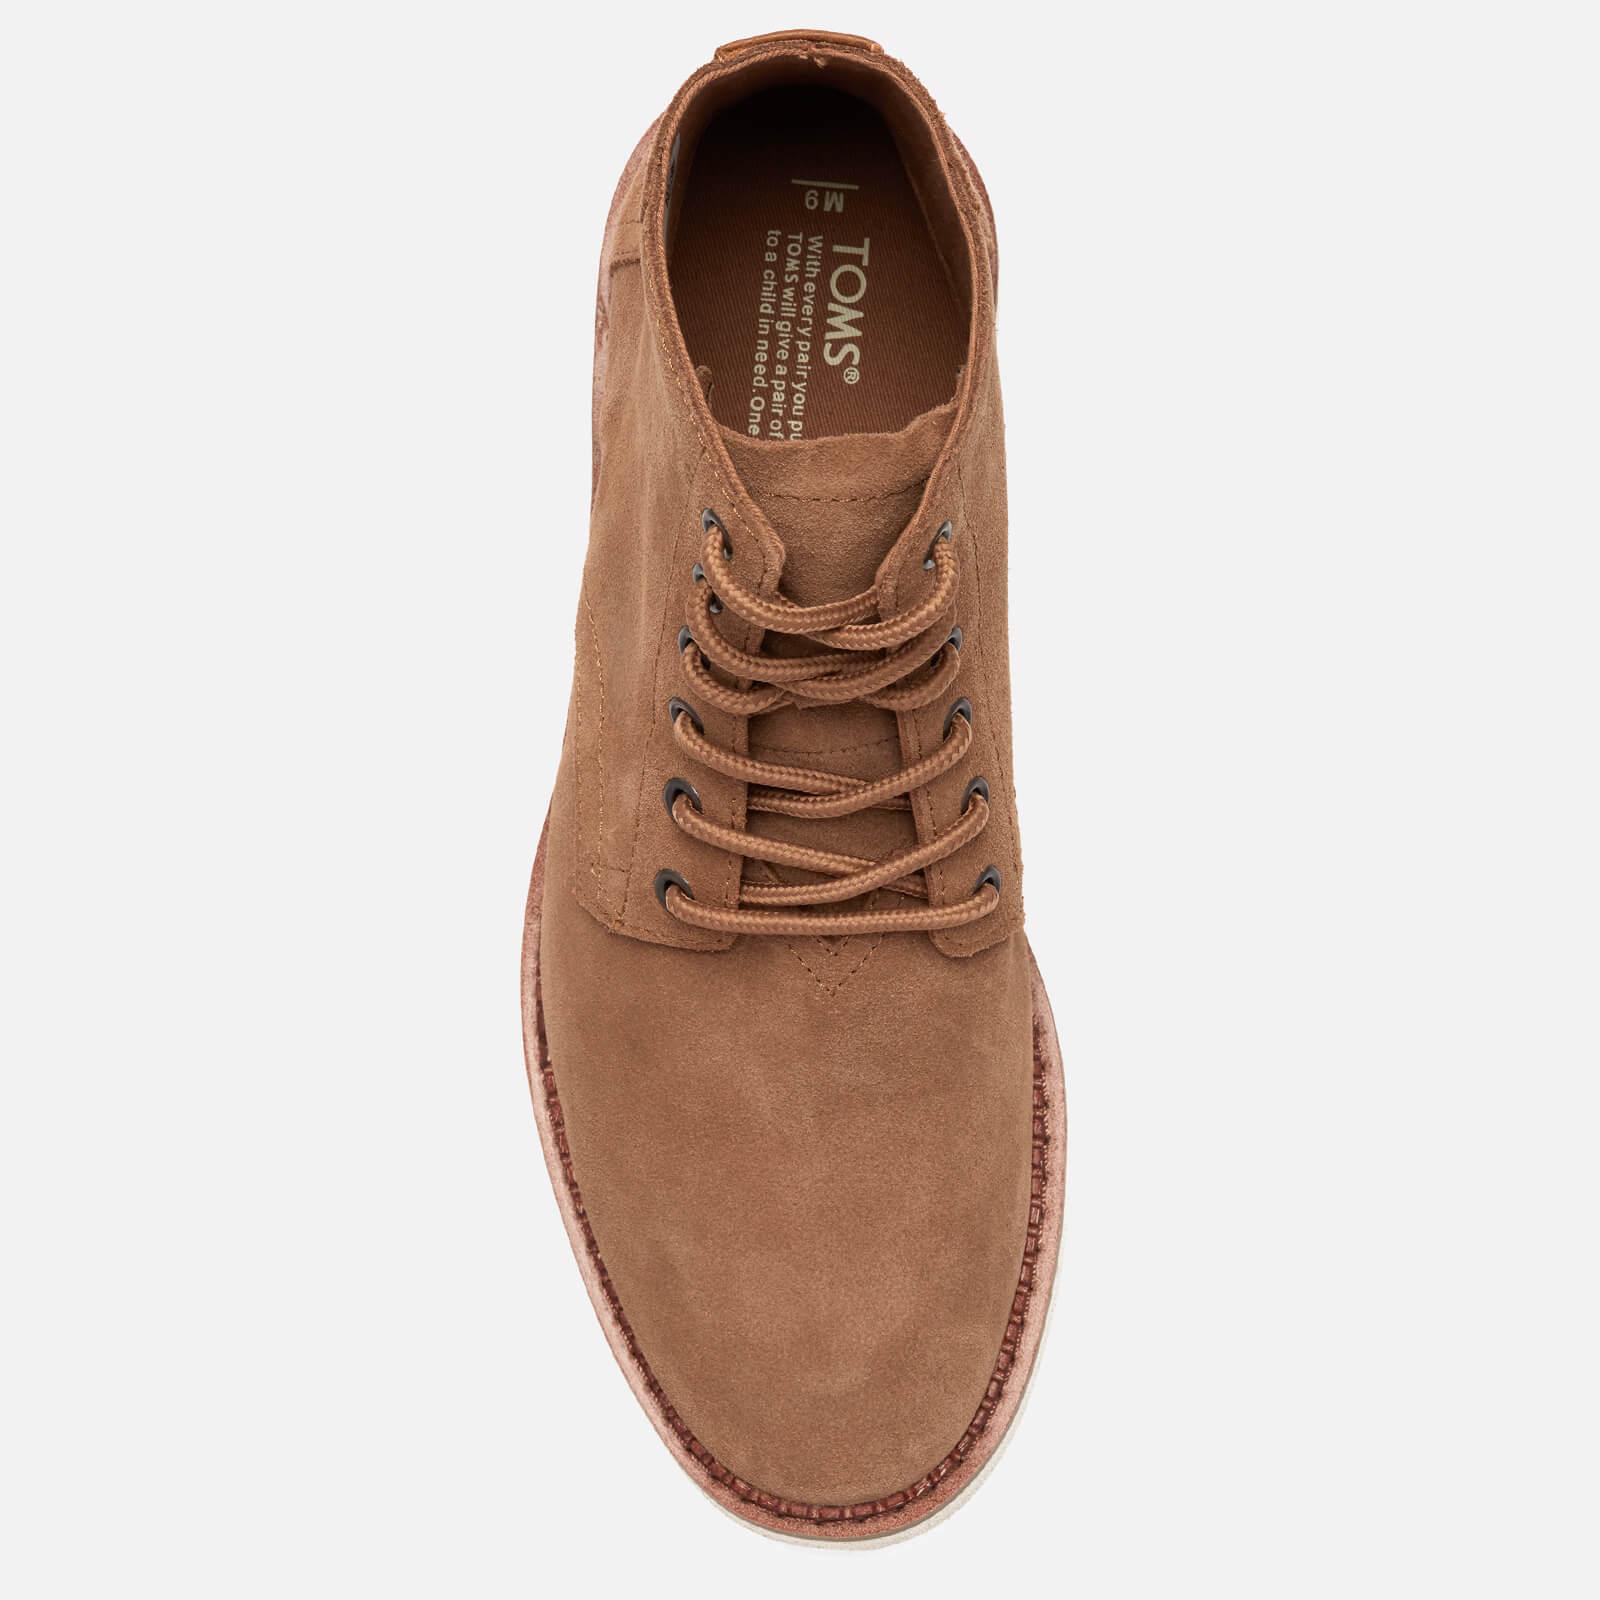 TOMS Porter Suede Lace Up Boots in Brown for Men - Lyst